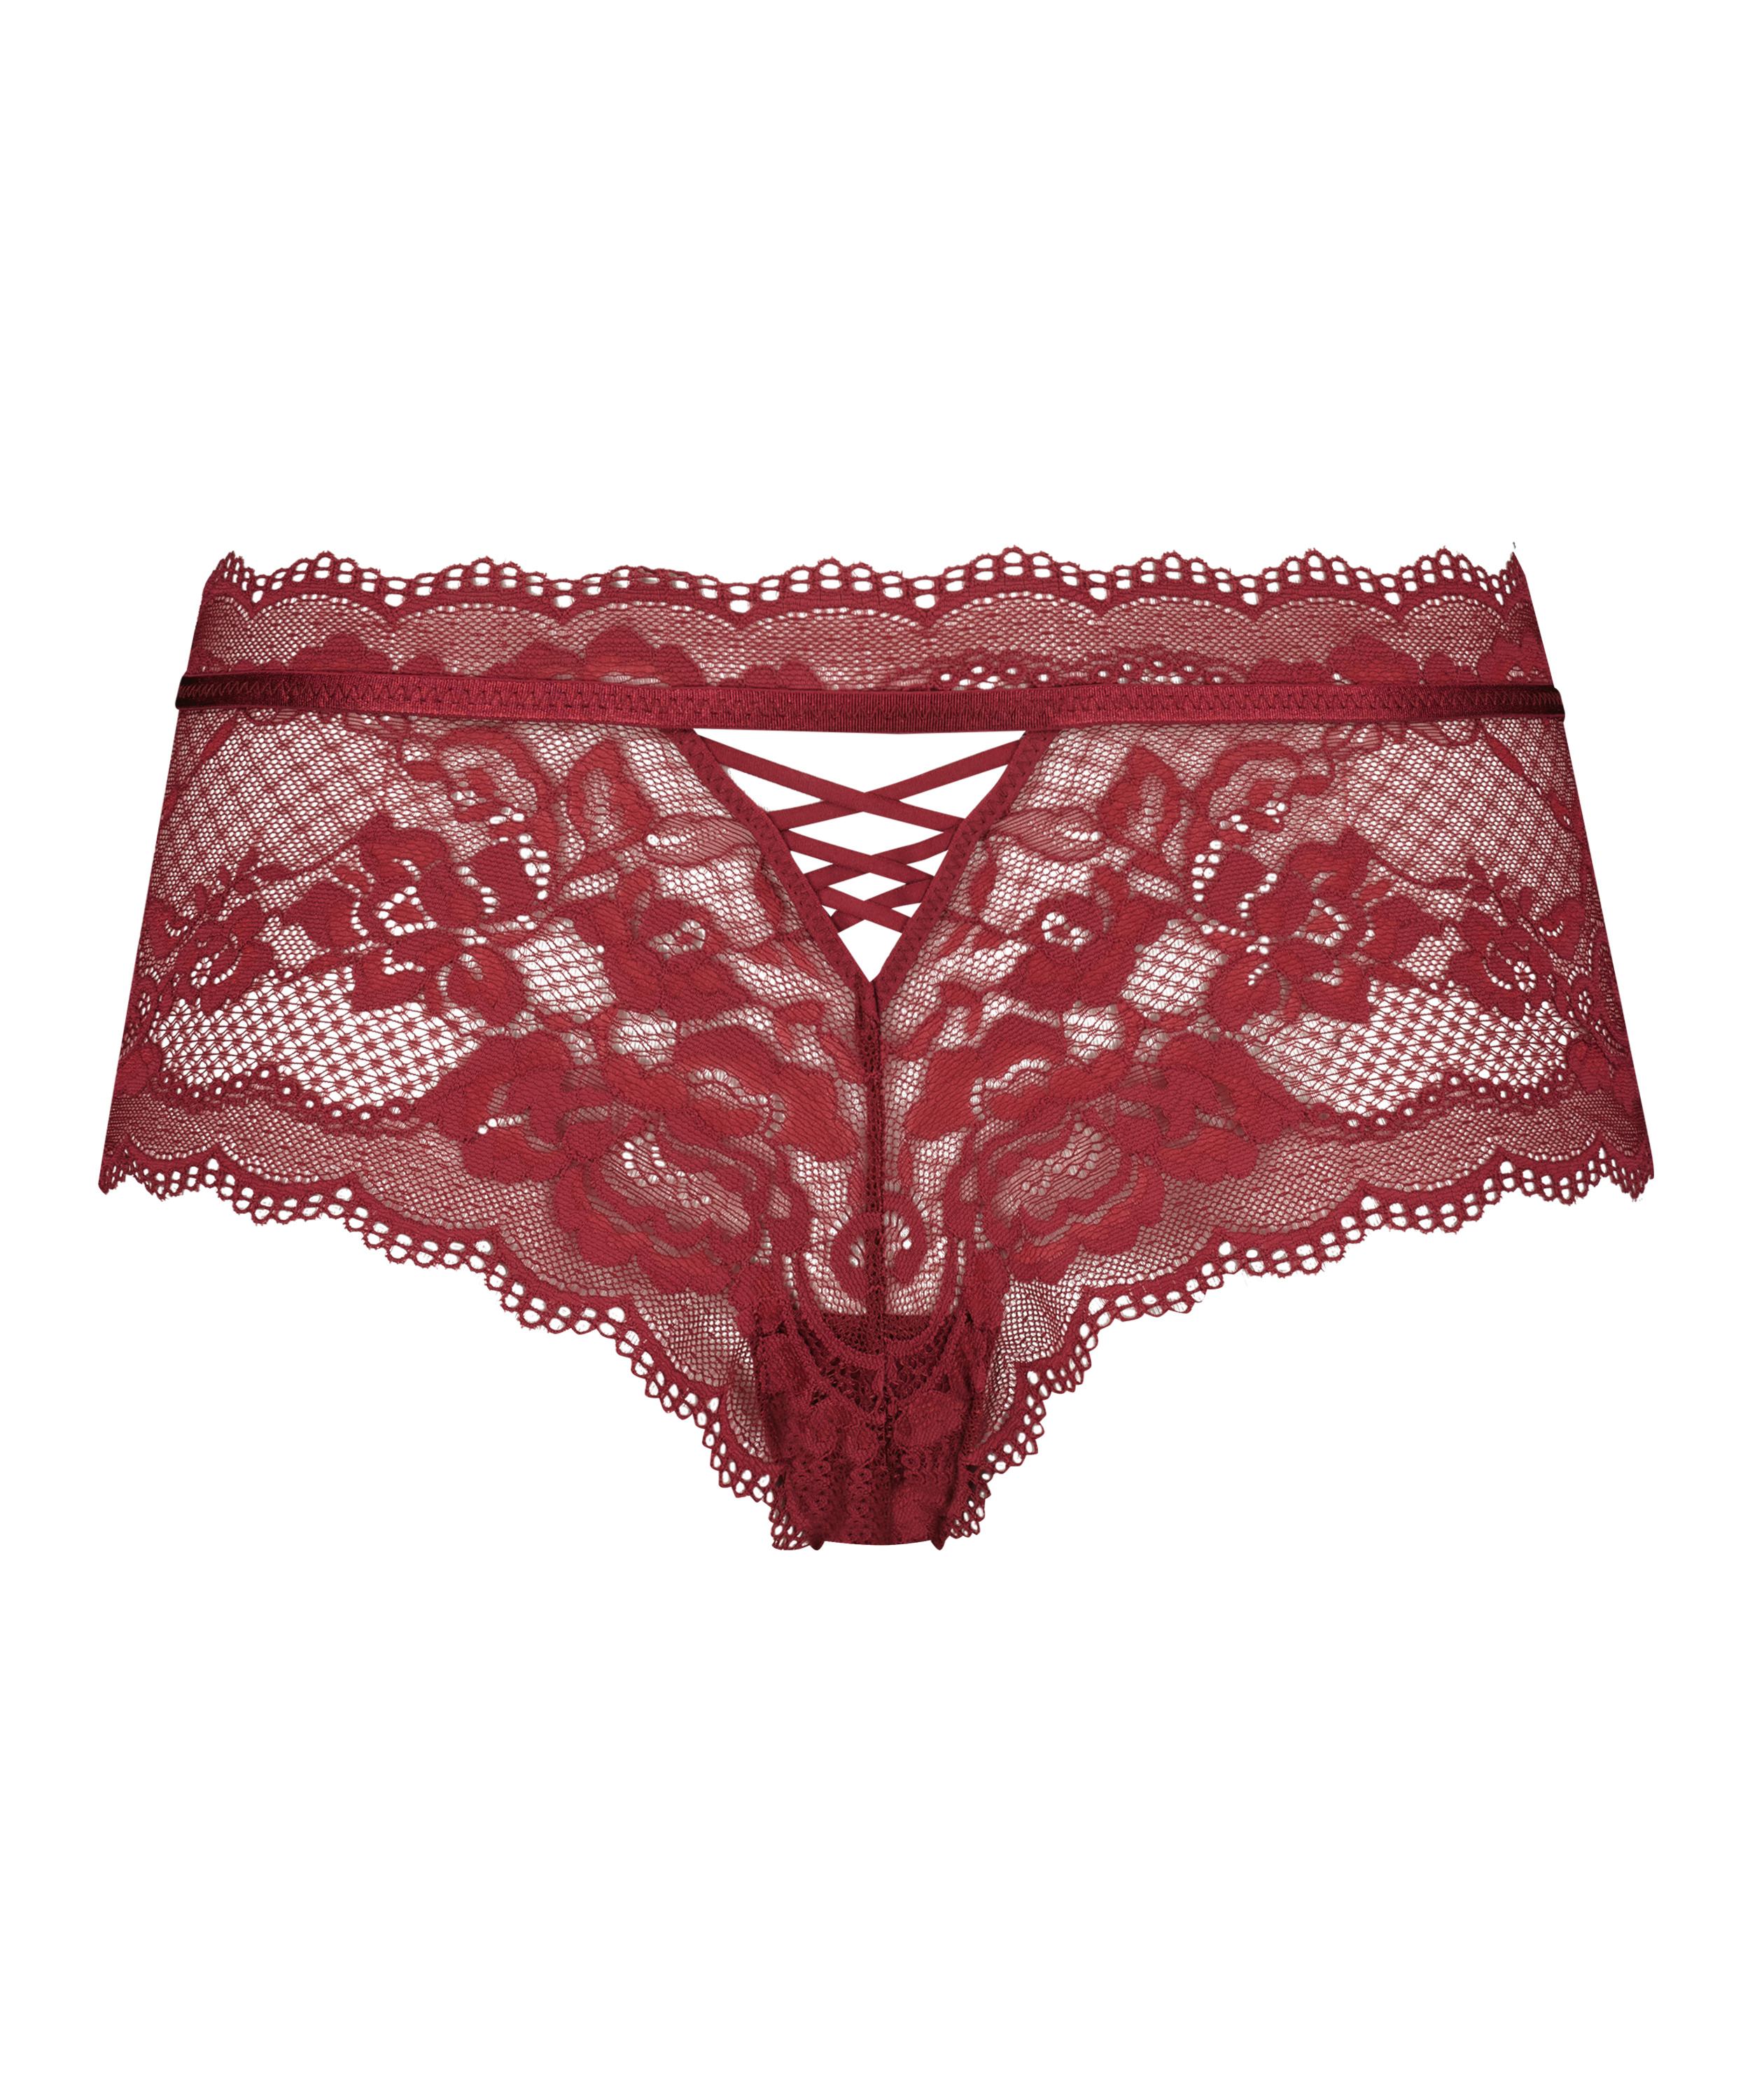 Palima Boxers, Red, main